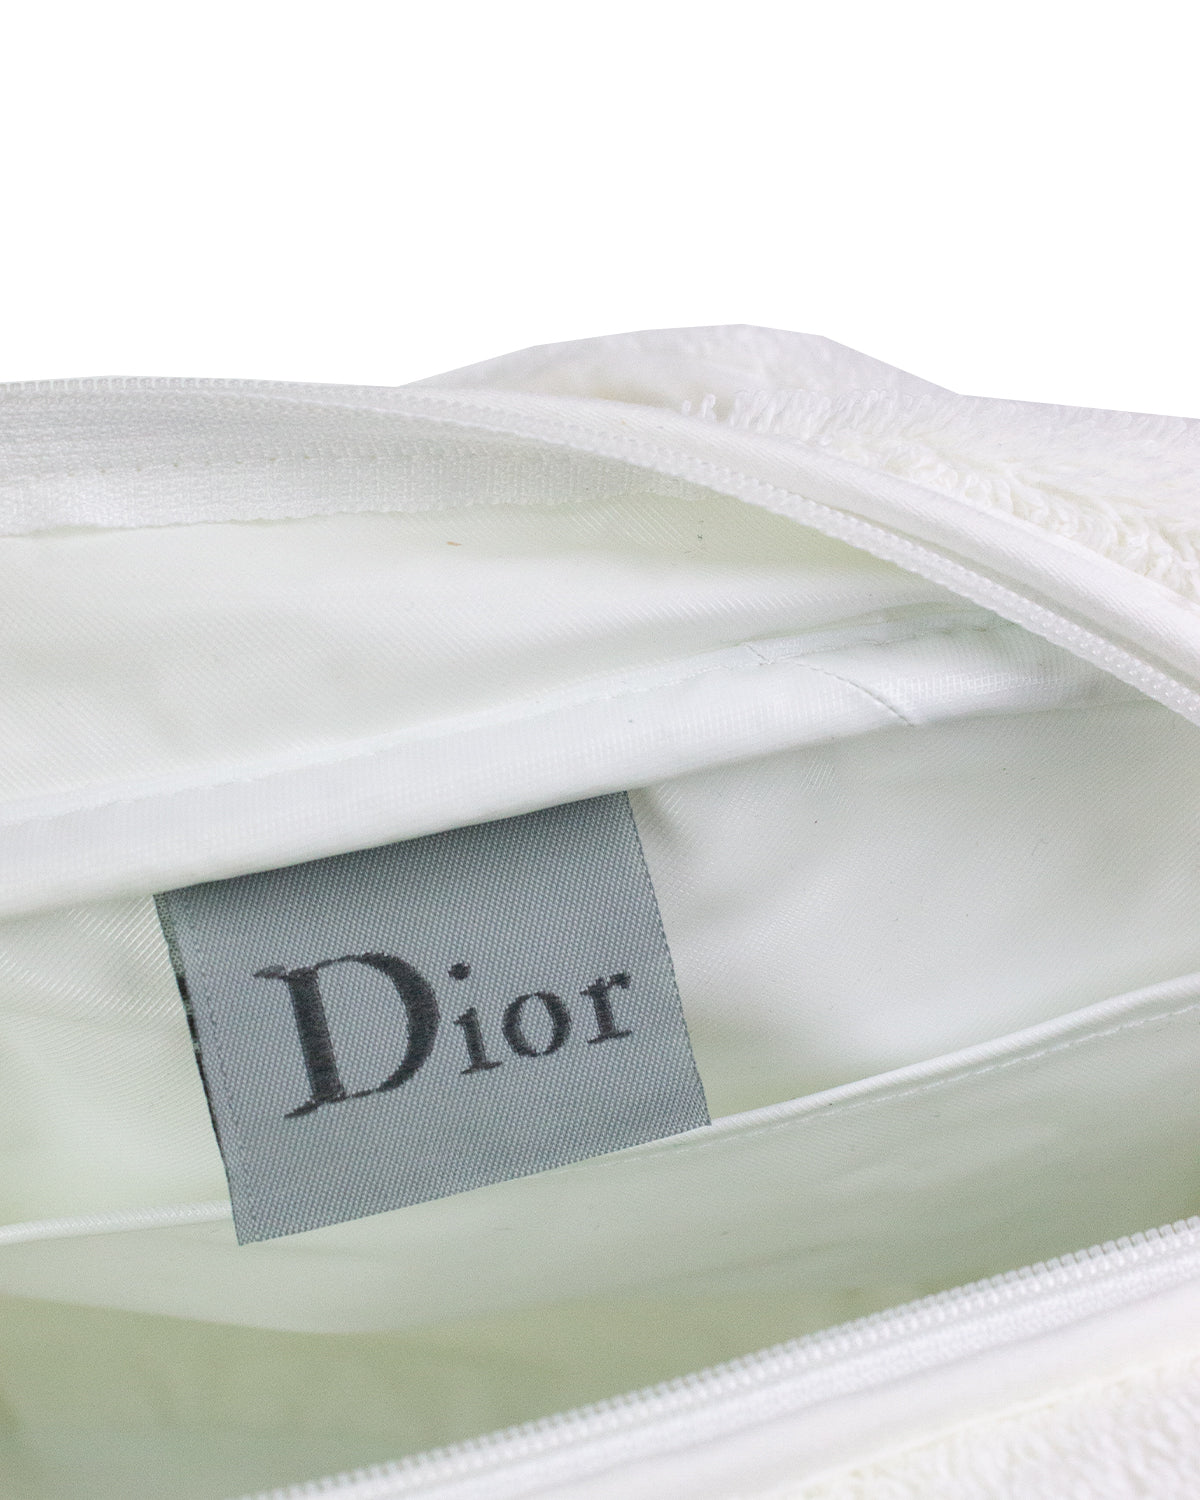 Dior - Authenticated Trainer - Cloth White for Women, Never Worn, with Tag